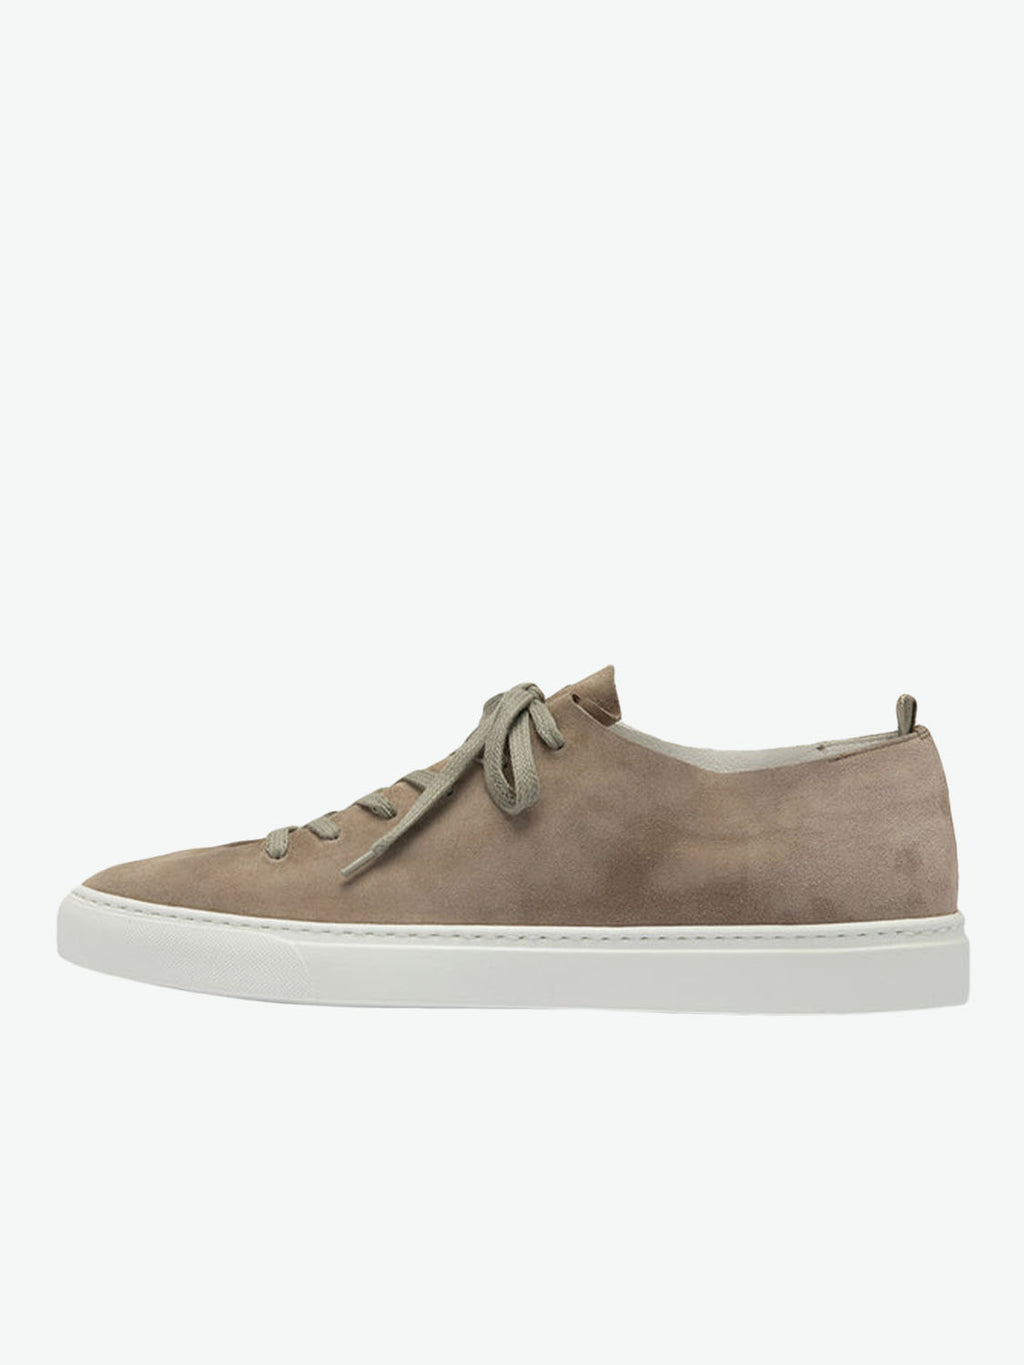 Officine Creative Leggera 001 Taupe Suede Low Top Sneakers